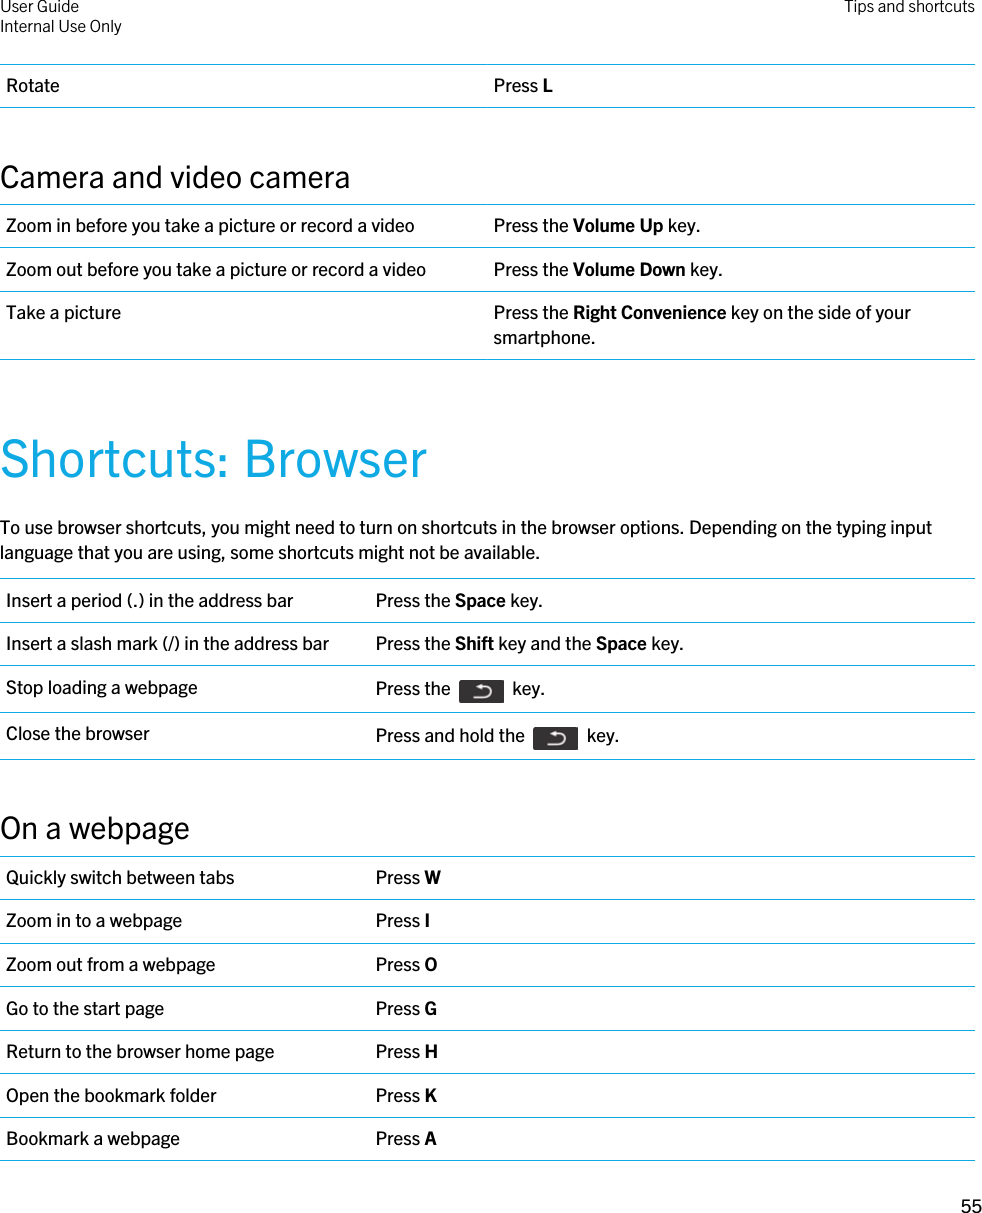 Rotate Press LCamera and video cameraZoom in before you take a picture or record a video Press the Volume Up key.Zoom out before you take a picture or record a video Press the Volume Down key.Take a picture Press the Right Convenience key on the side of your smartphone.Shortcuts: BrowserTo use browser shortcuts, you might need to turn on shortcuts in the browser options. Depending on the typing input language that you are using, some shortcuts might not be available.Insert a period (.) in the address bar Press the Space key.Insert a slash mark (/) in the address bar Press the Shift key and the Space key.Stop loading a webpage Press the    key.Close the browser Press and hold the    key.On a webpageQuickly switch between tabs Press WZoom in to a webpage Press IZoom out from a webpage Press OGo to the start page Press GReturn to the browser home page Press HOpen the bookmark folder Press KBookmark a webpage Press AUser GuideInternal Use Only Tips and shortcuts55 